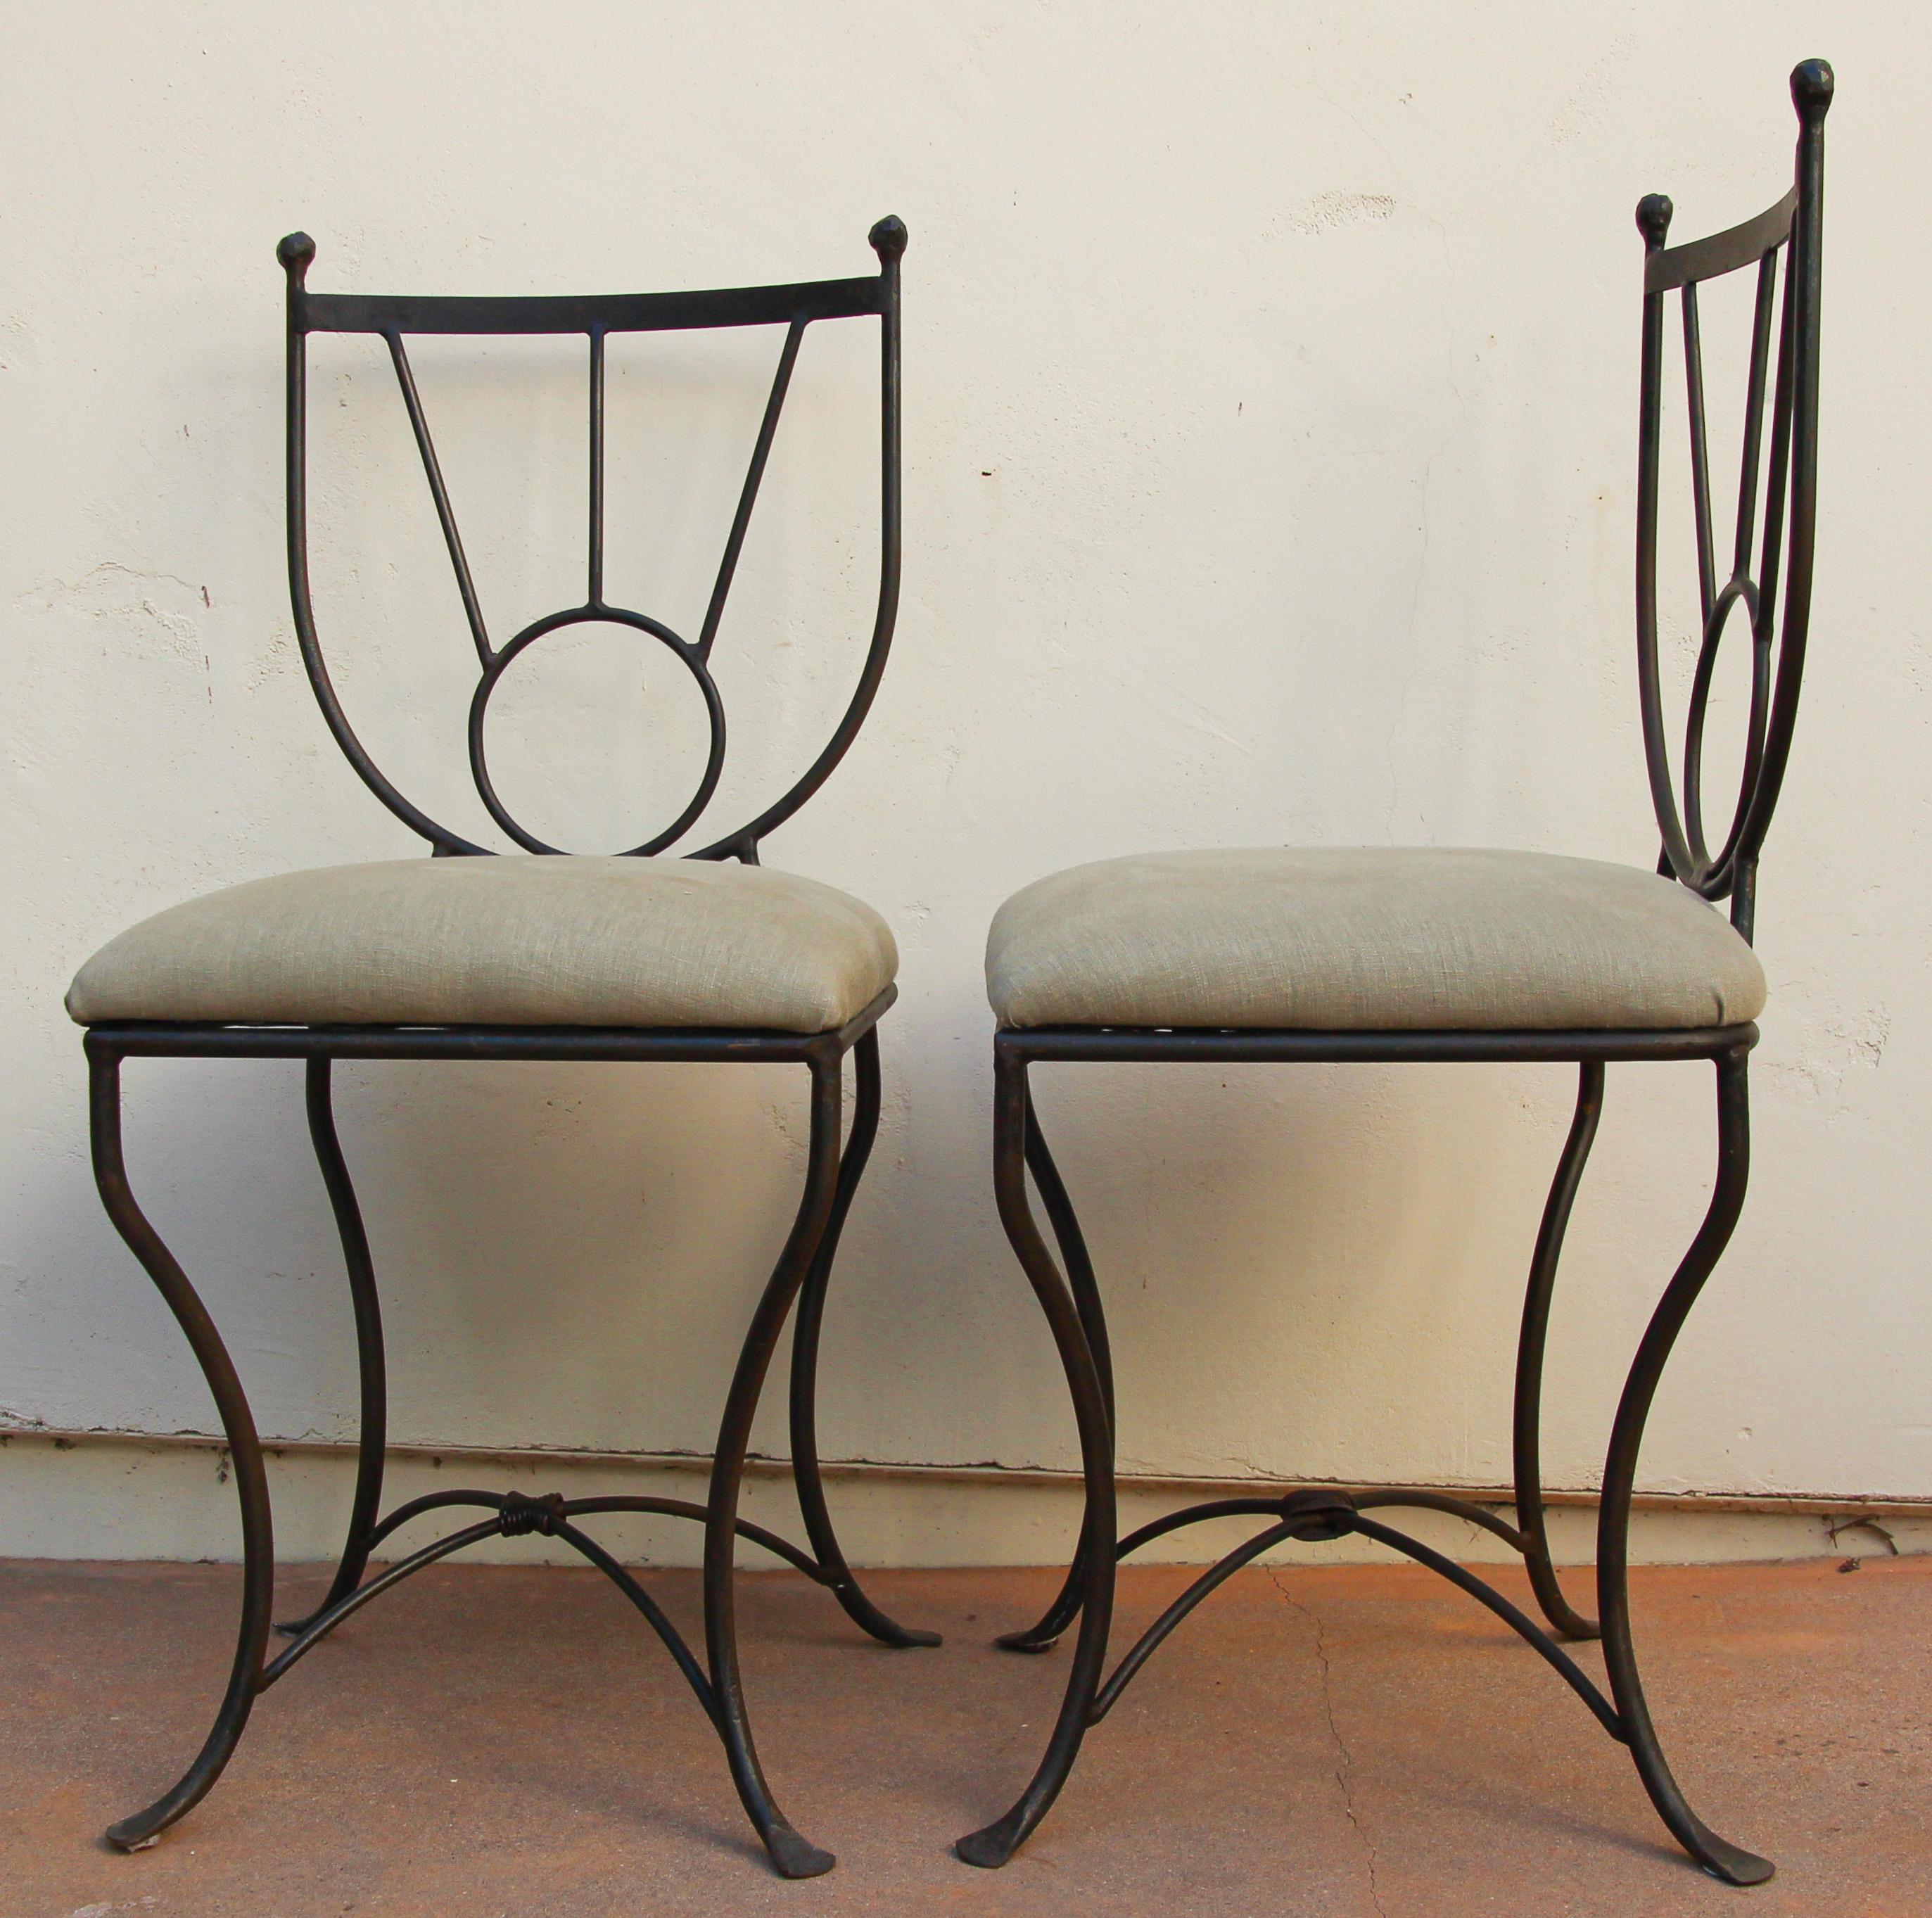 Hand-Crafted Outdoor Wrought Iron Chairs Set of Four in Mario Papperzini Style